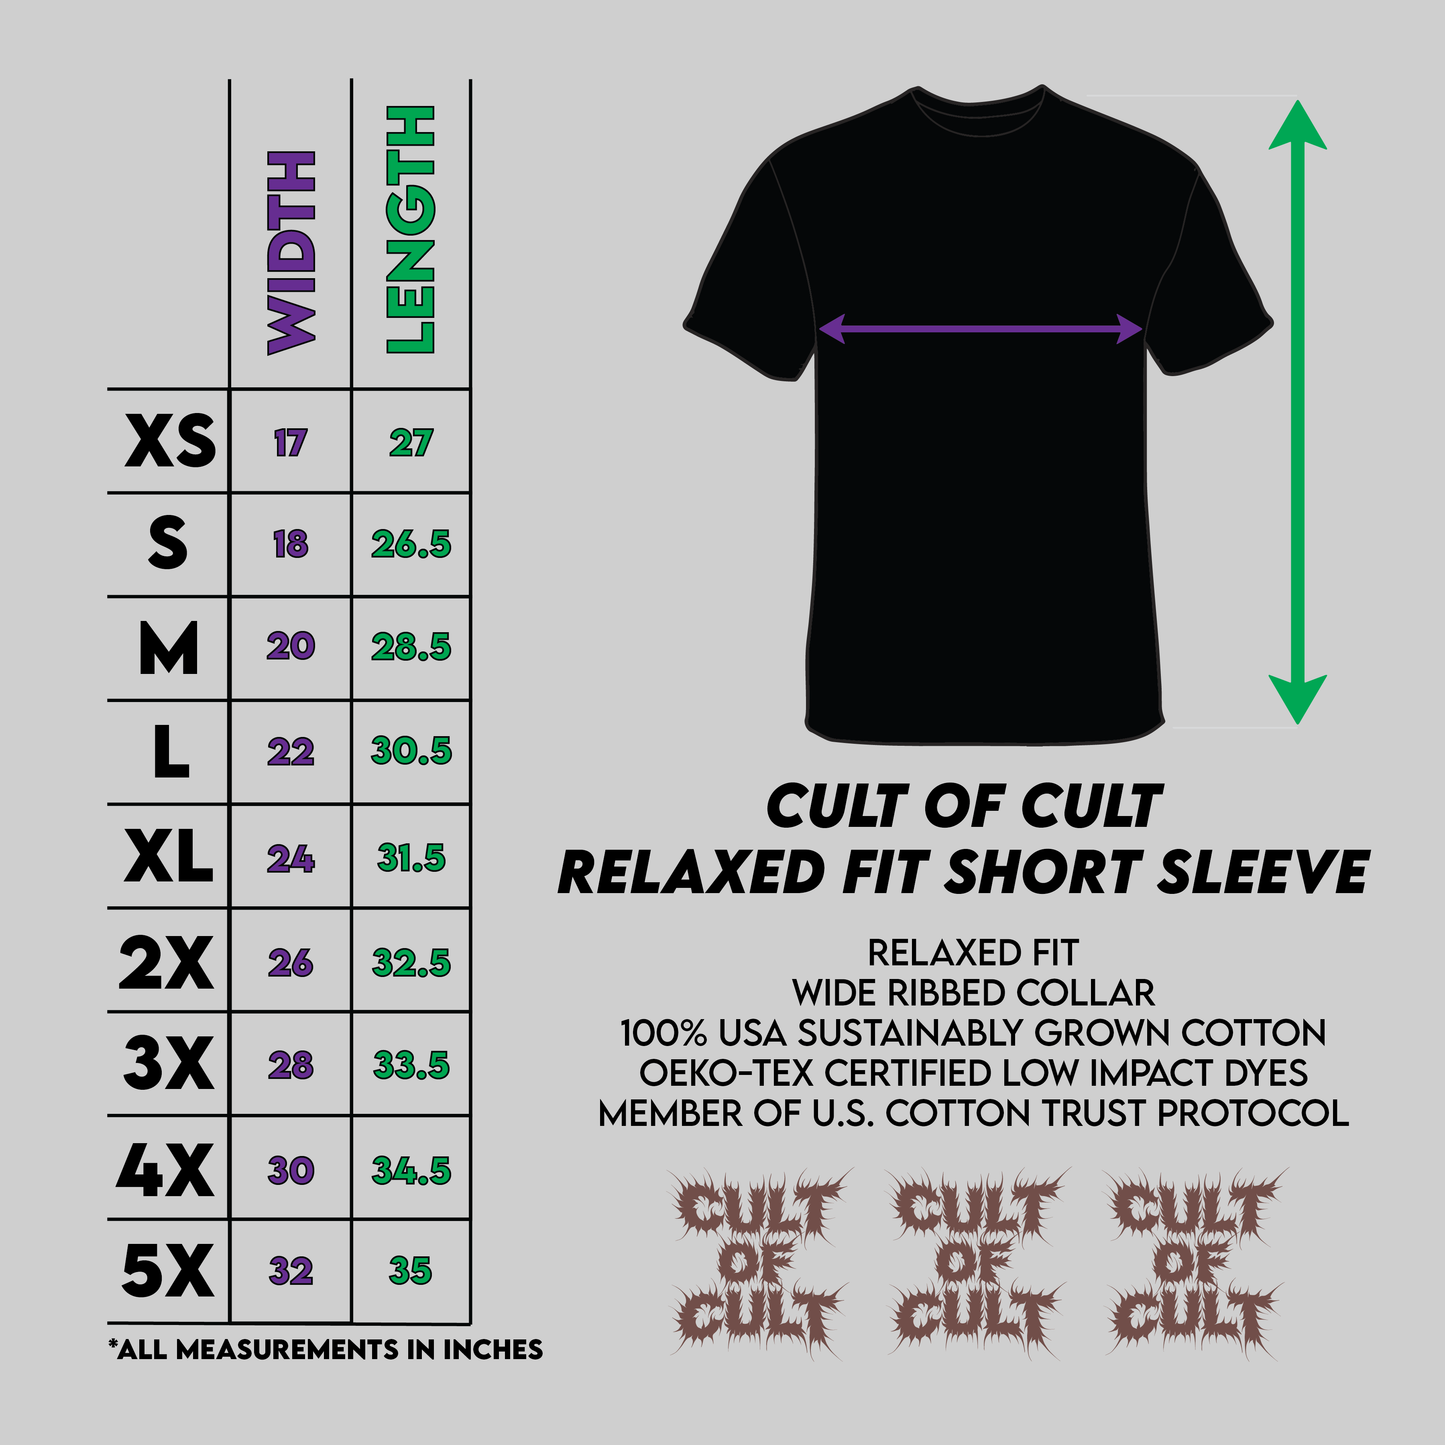 Cult of Cult sizing chart